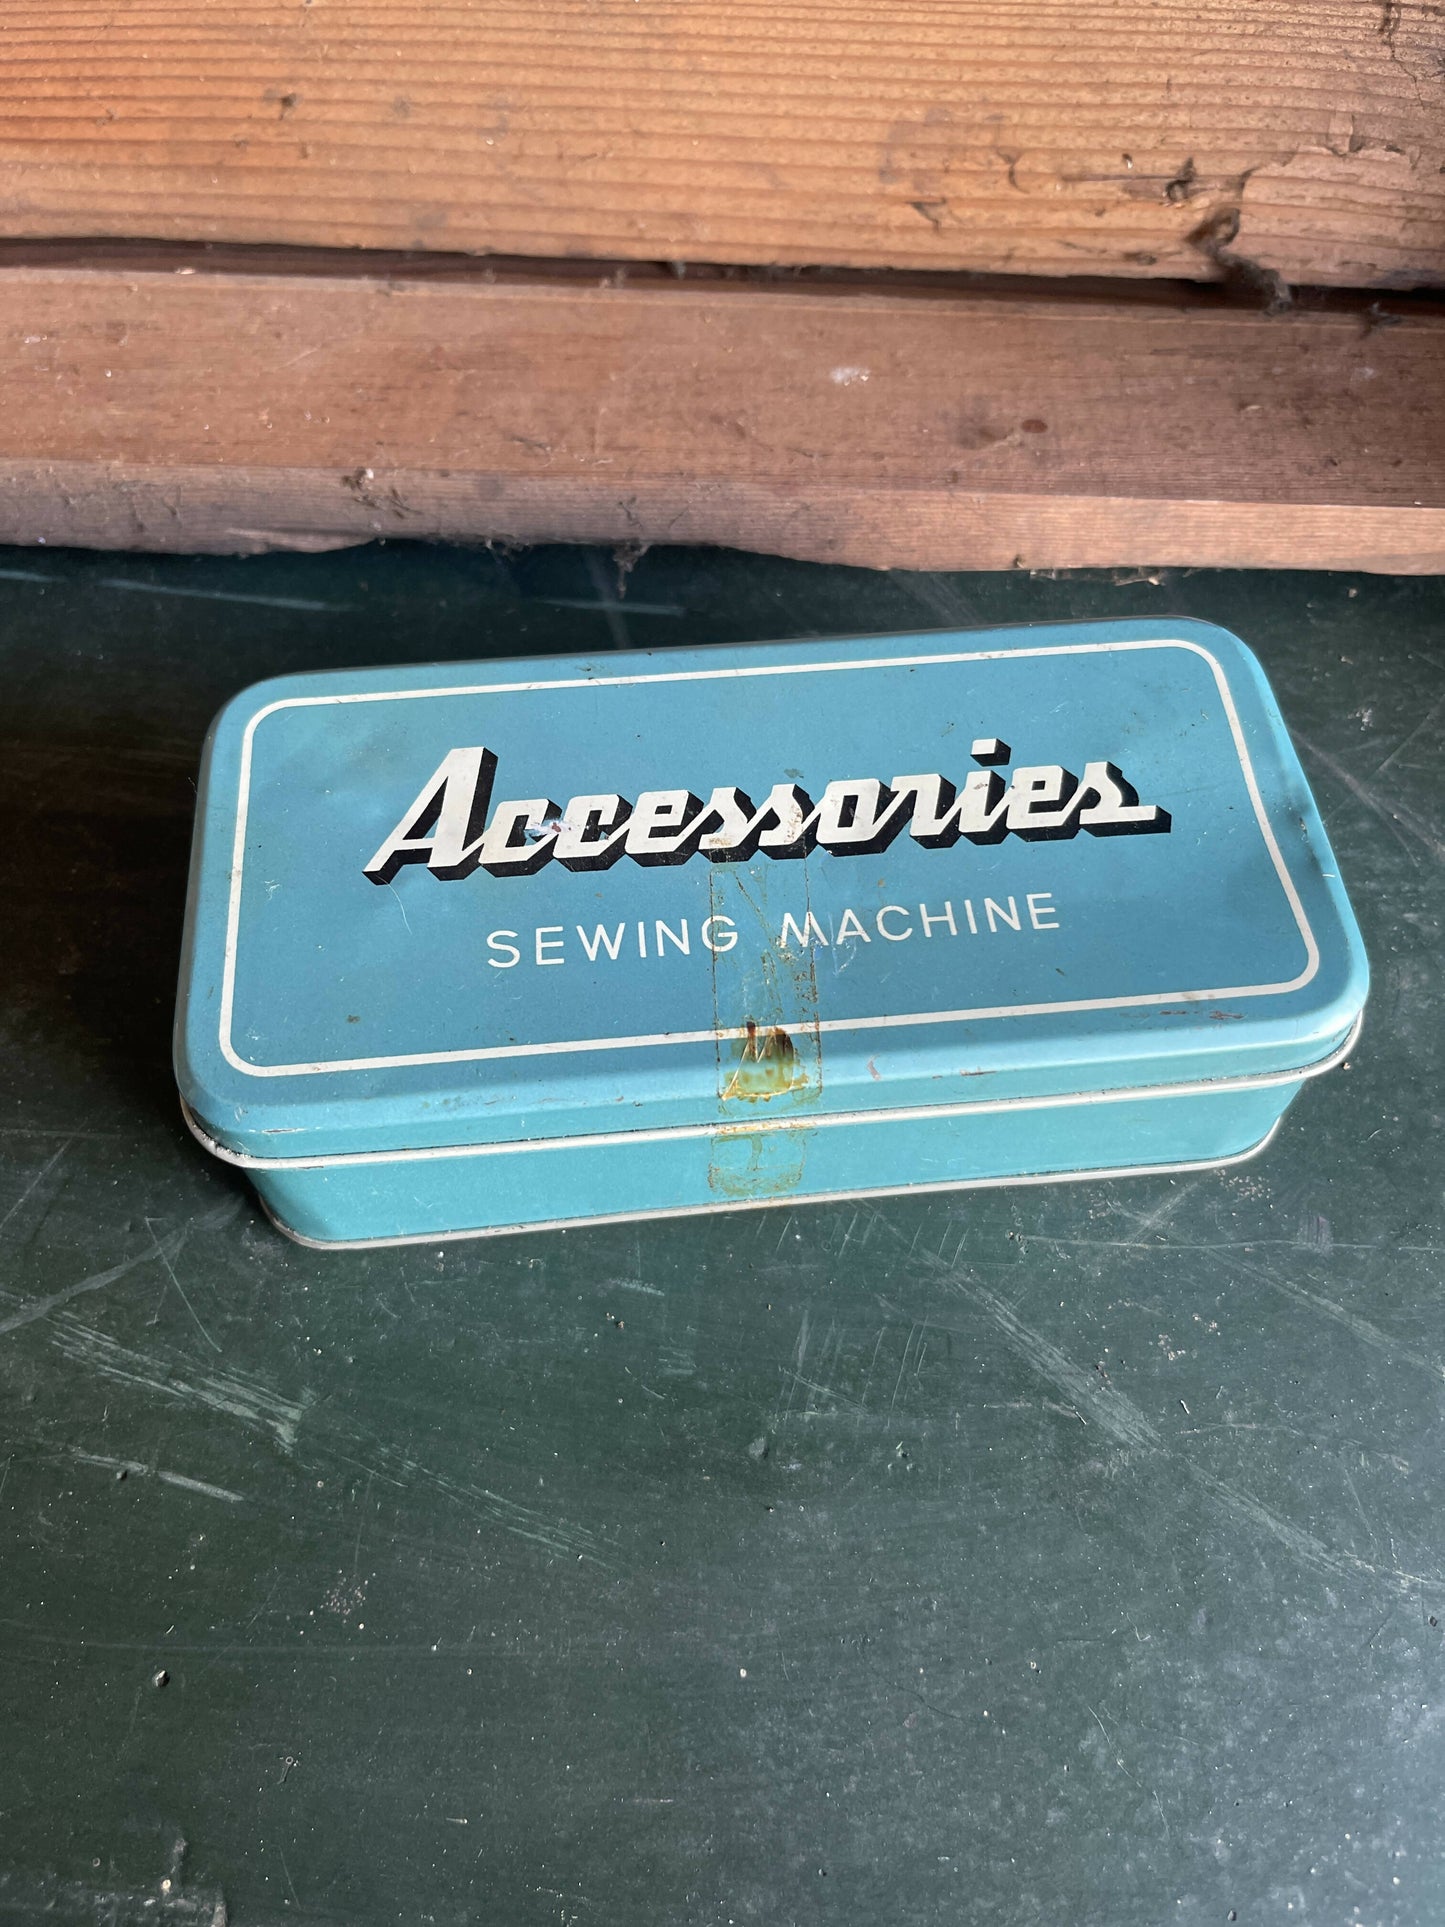 Vintage Accessories Sewing Tin Box, Blue Color, Antique Sewing Box, Desk Organizer